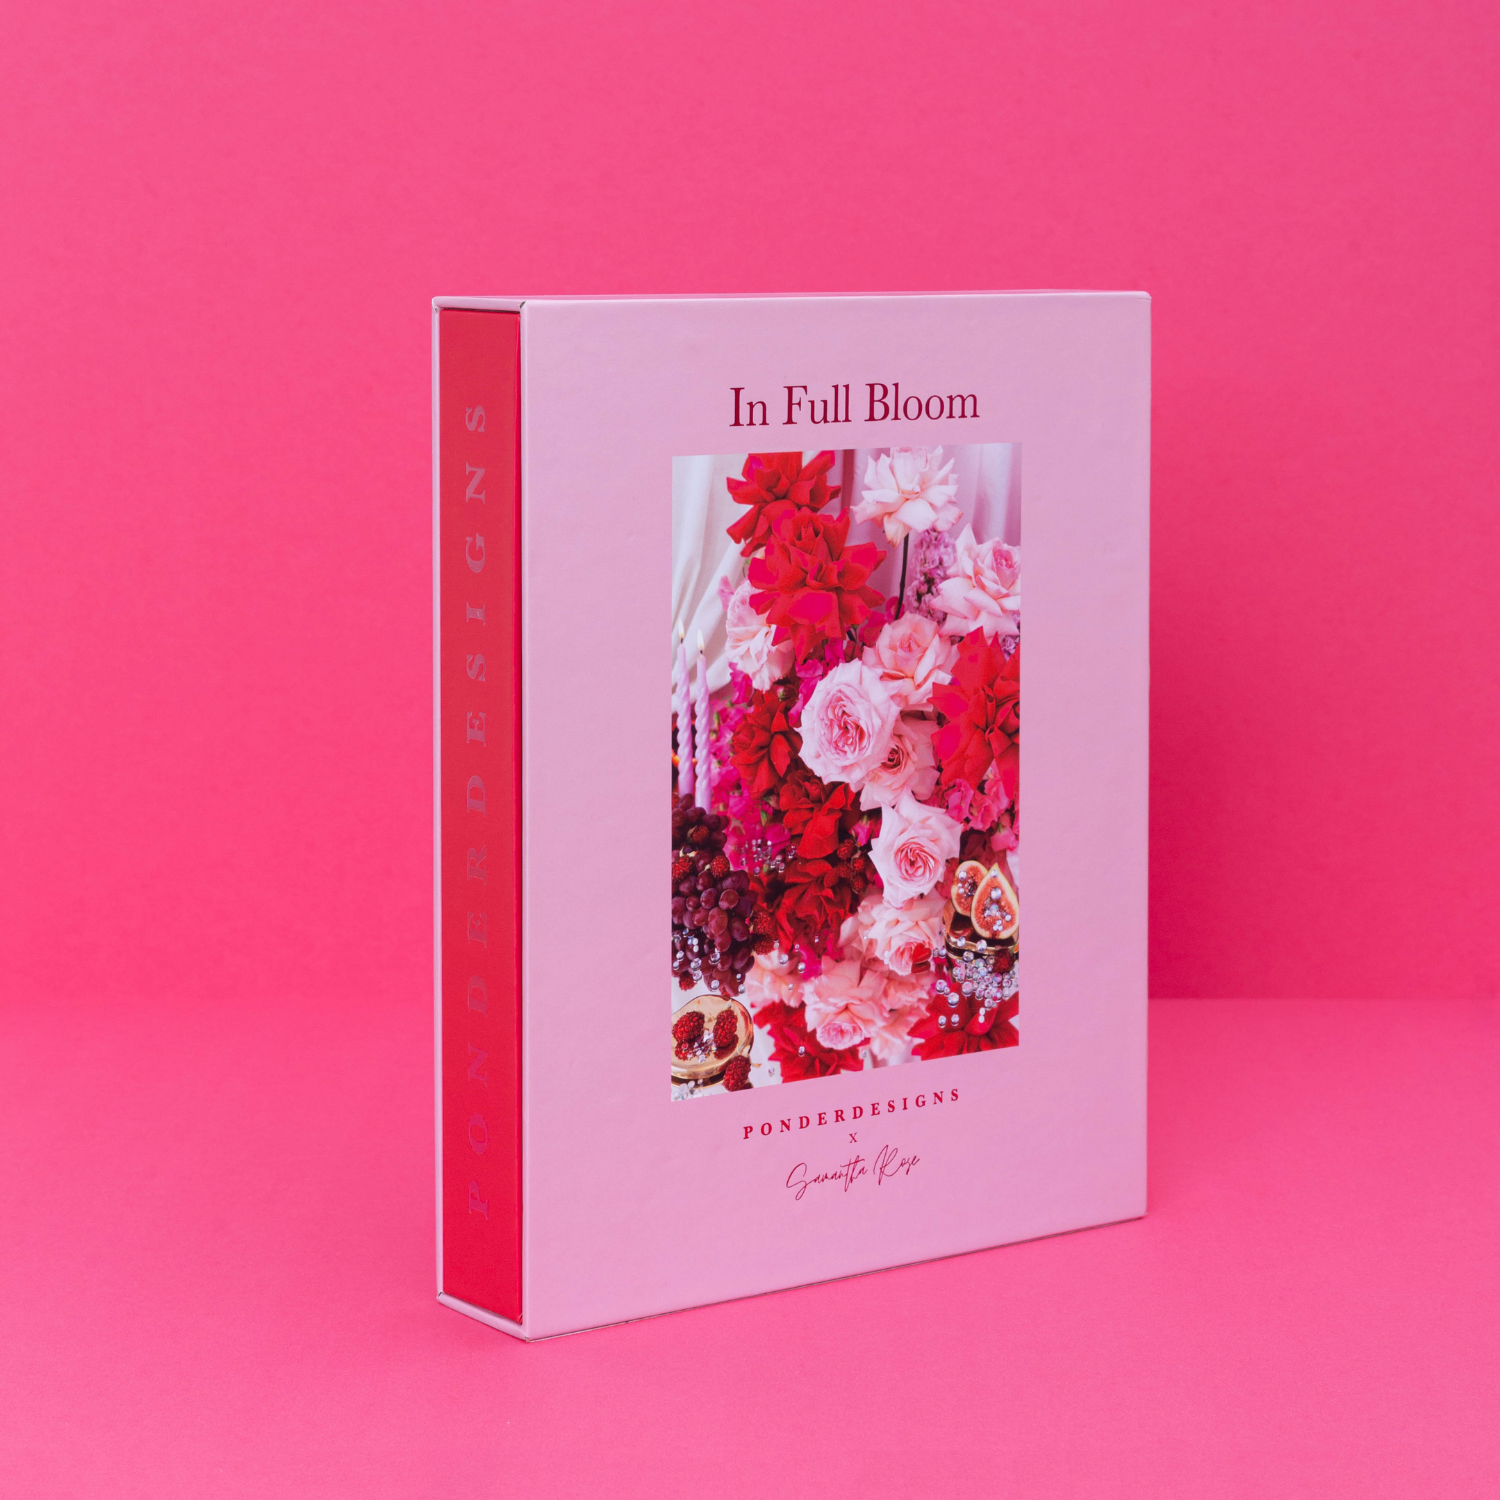 Ponder Design Co's In Full Bloom 1,000 piece jigsaw puzzle designed in collaboration with Samantha Rose. Hero puzzle packaging with florals, figs and pinks. Ponder while you puzzle.